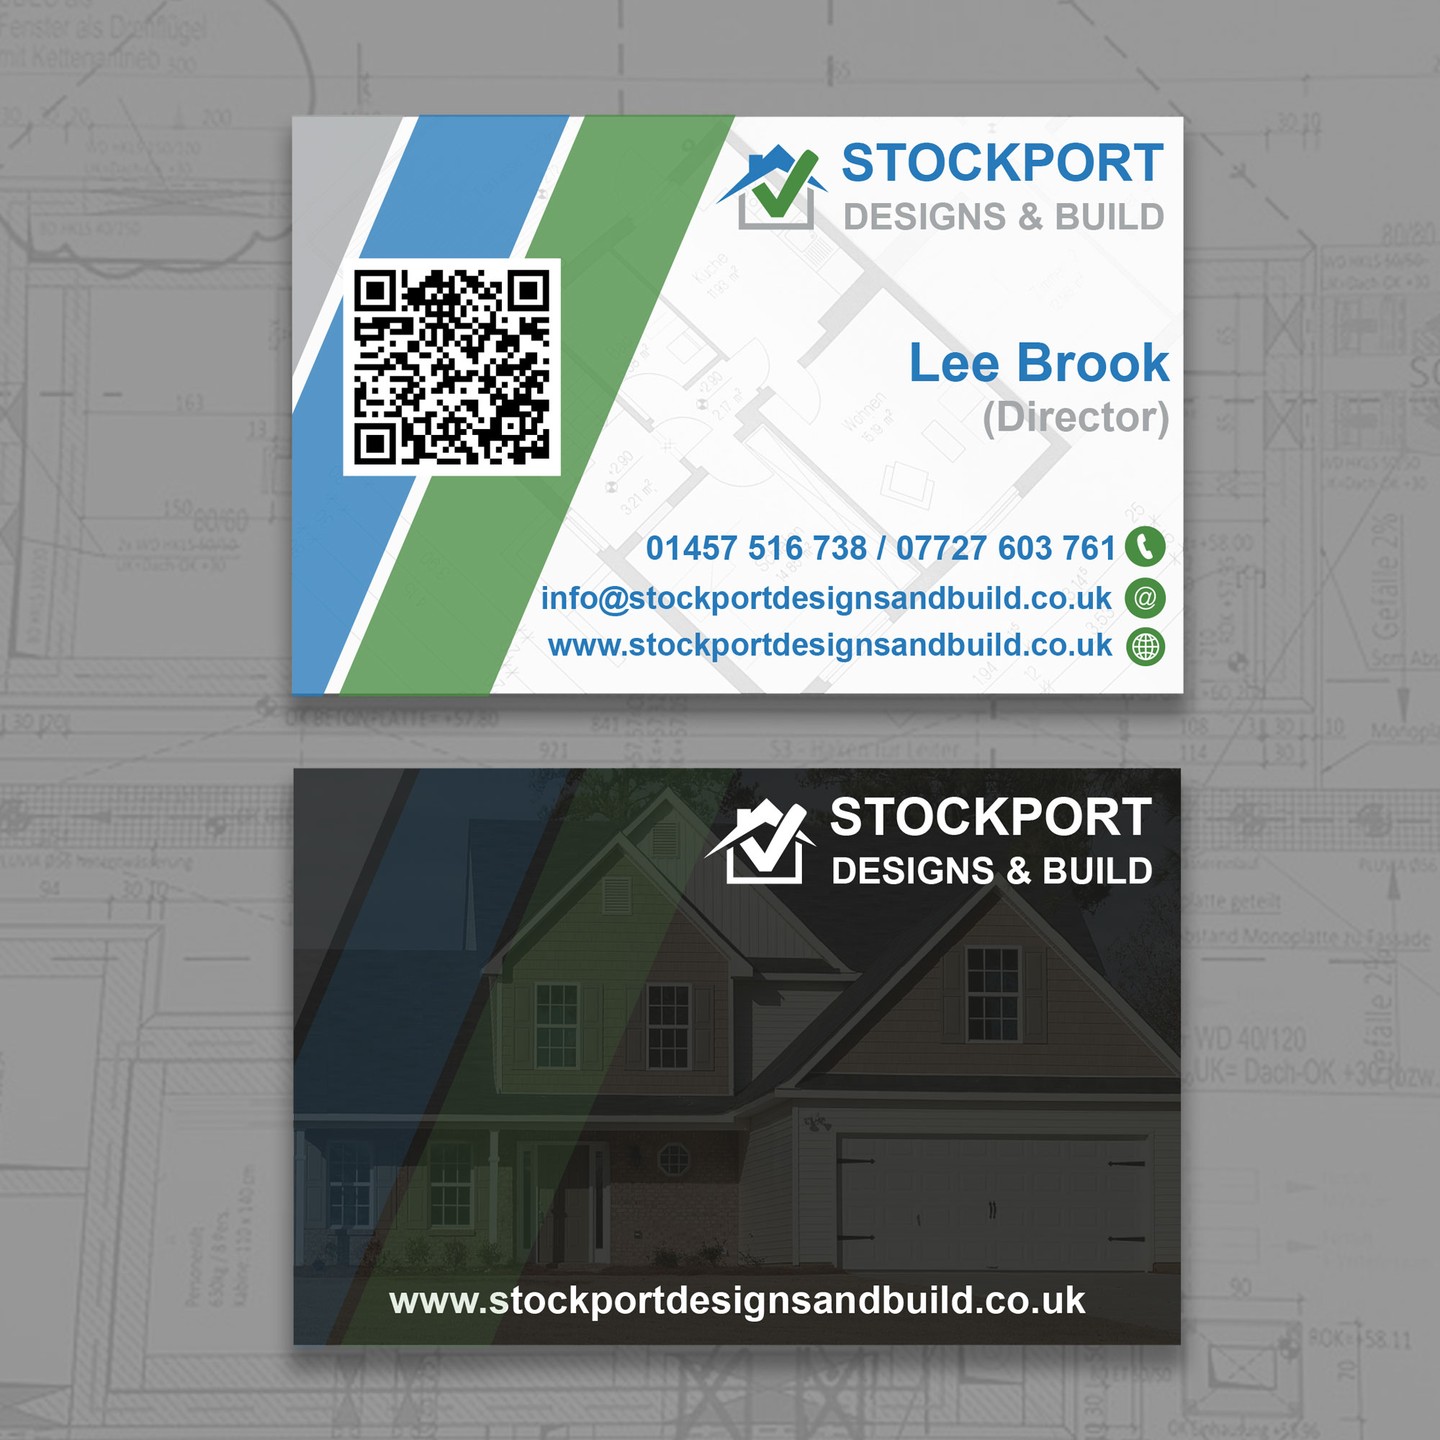 Stockport-designs-and-builds-bus